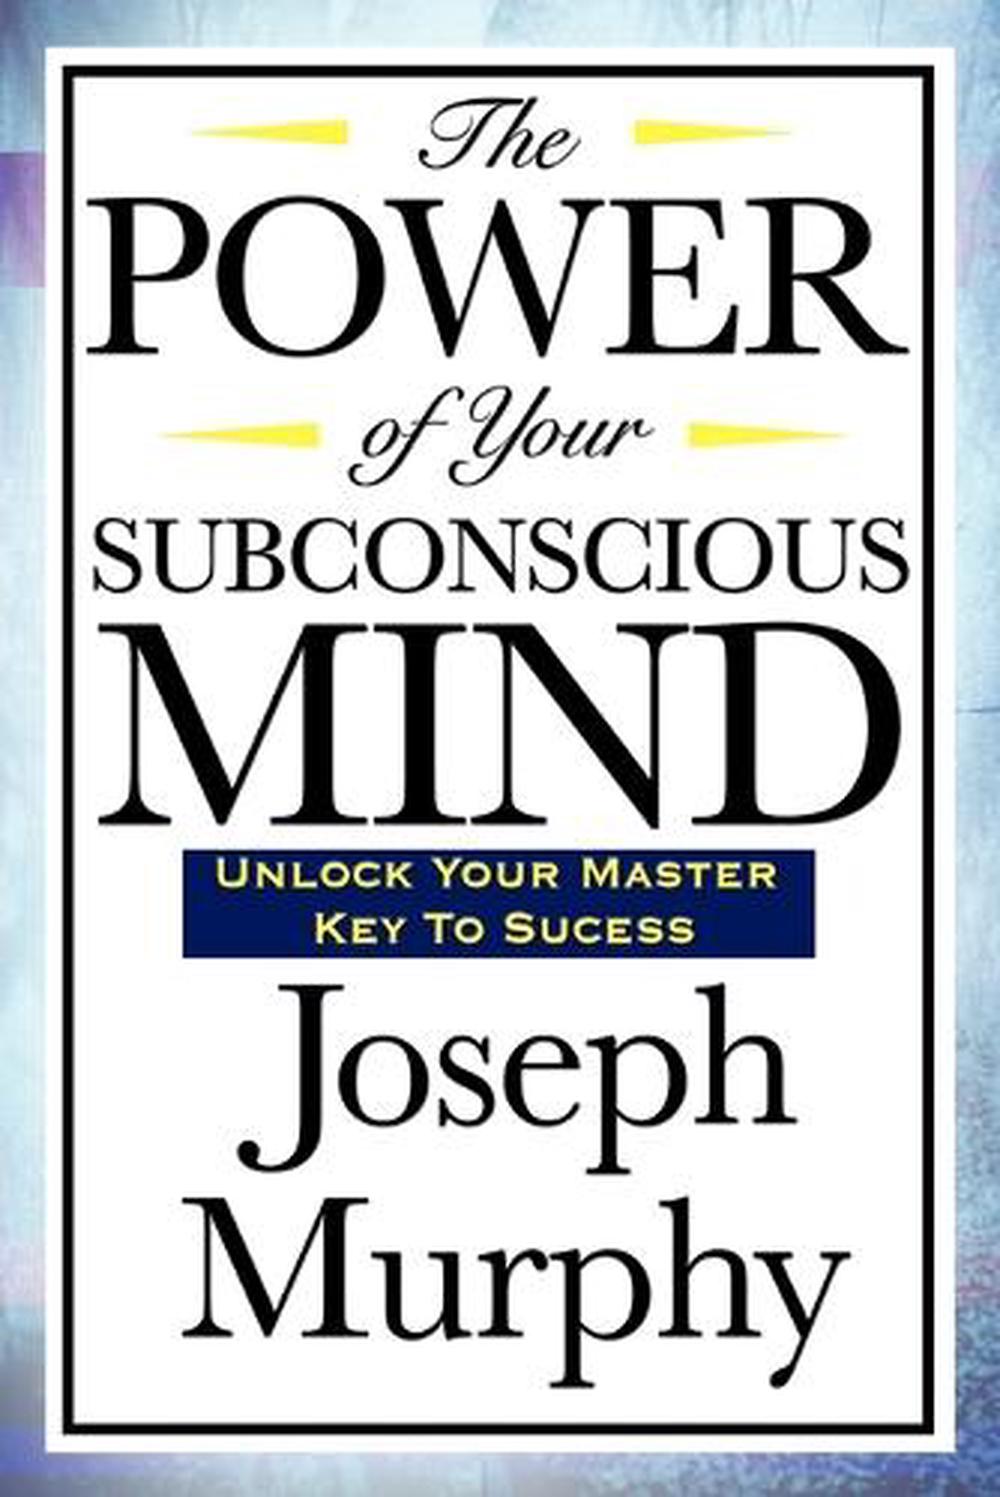 the power of unconscious mind pdf